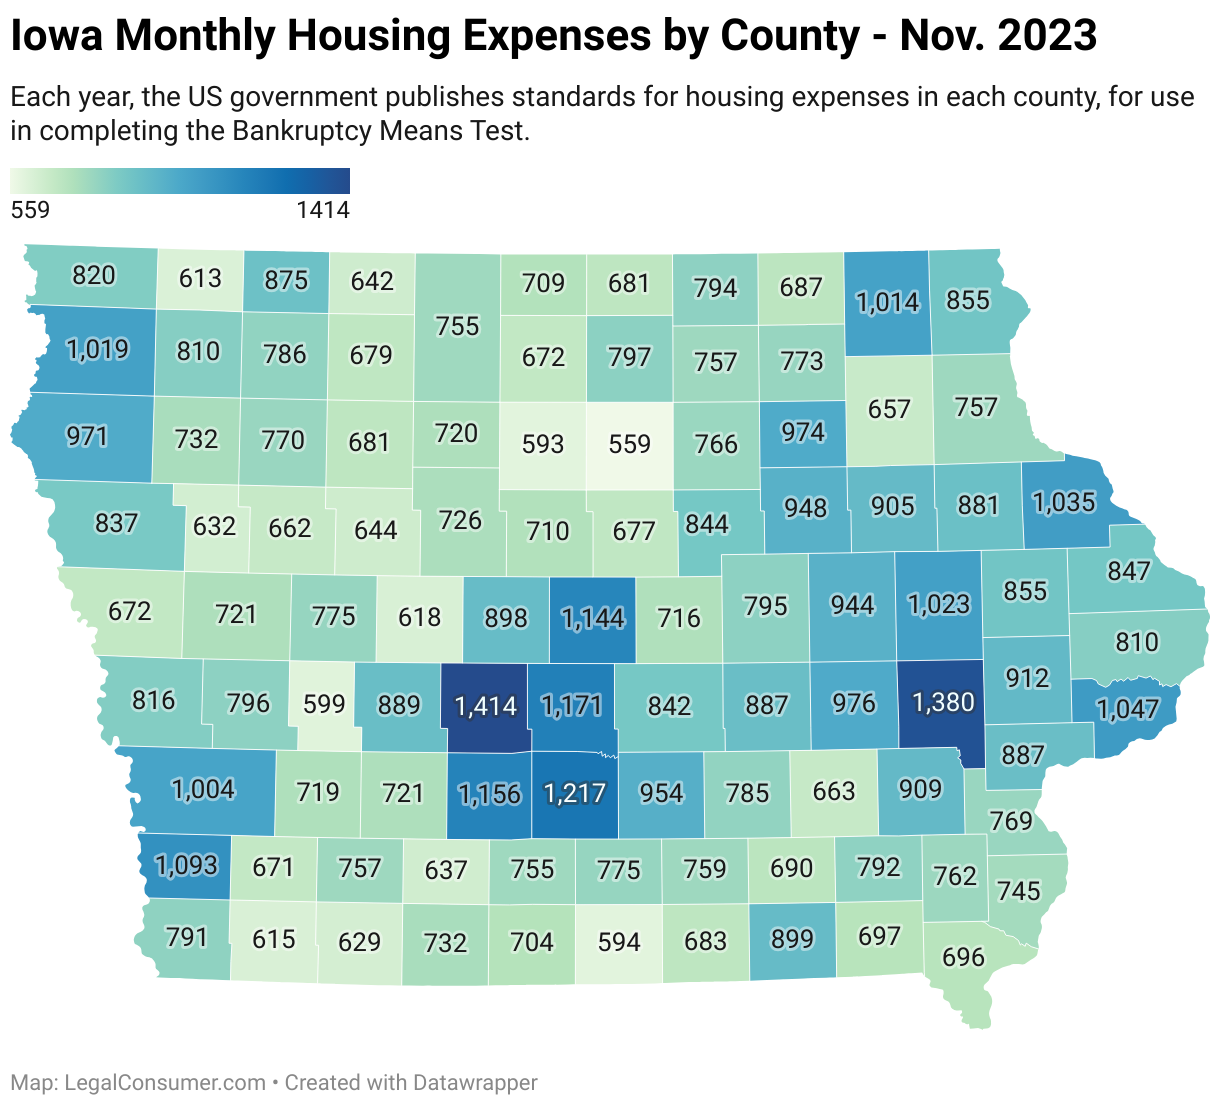 Map of Iowa Housing Expenses for Bankruptcy Means Test